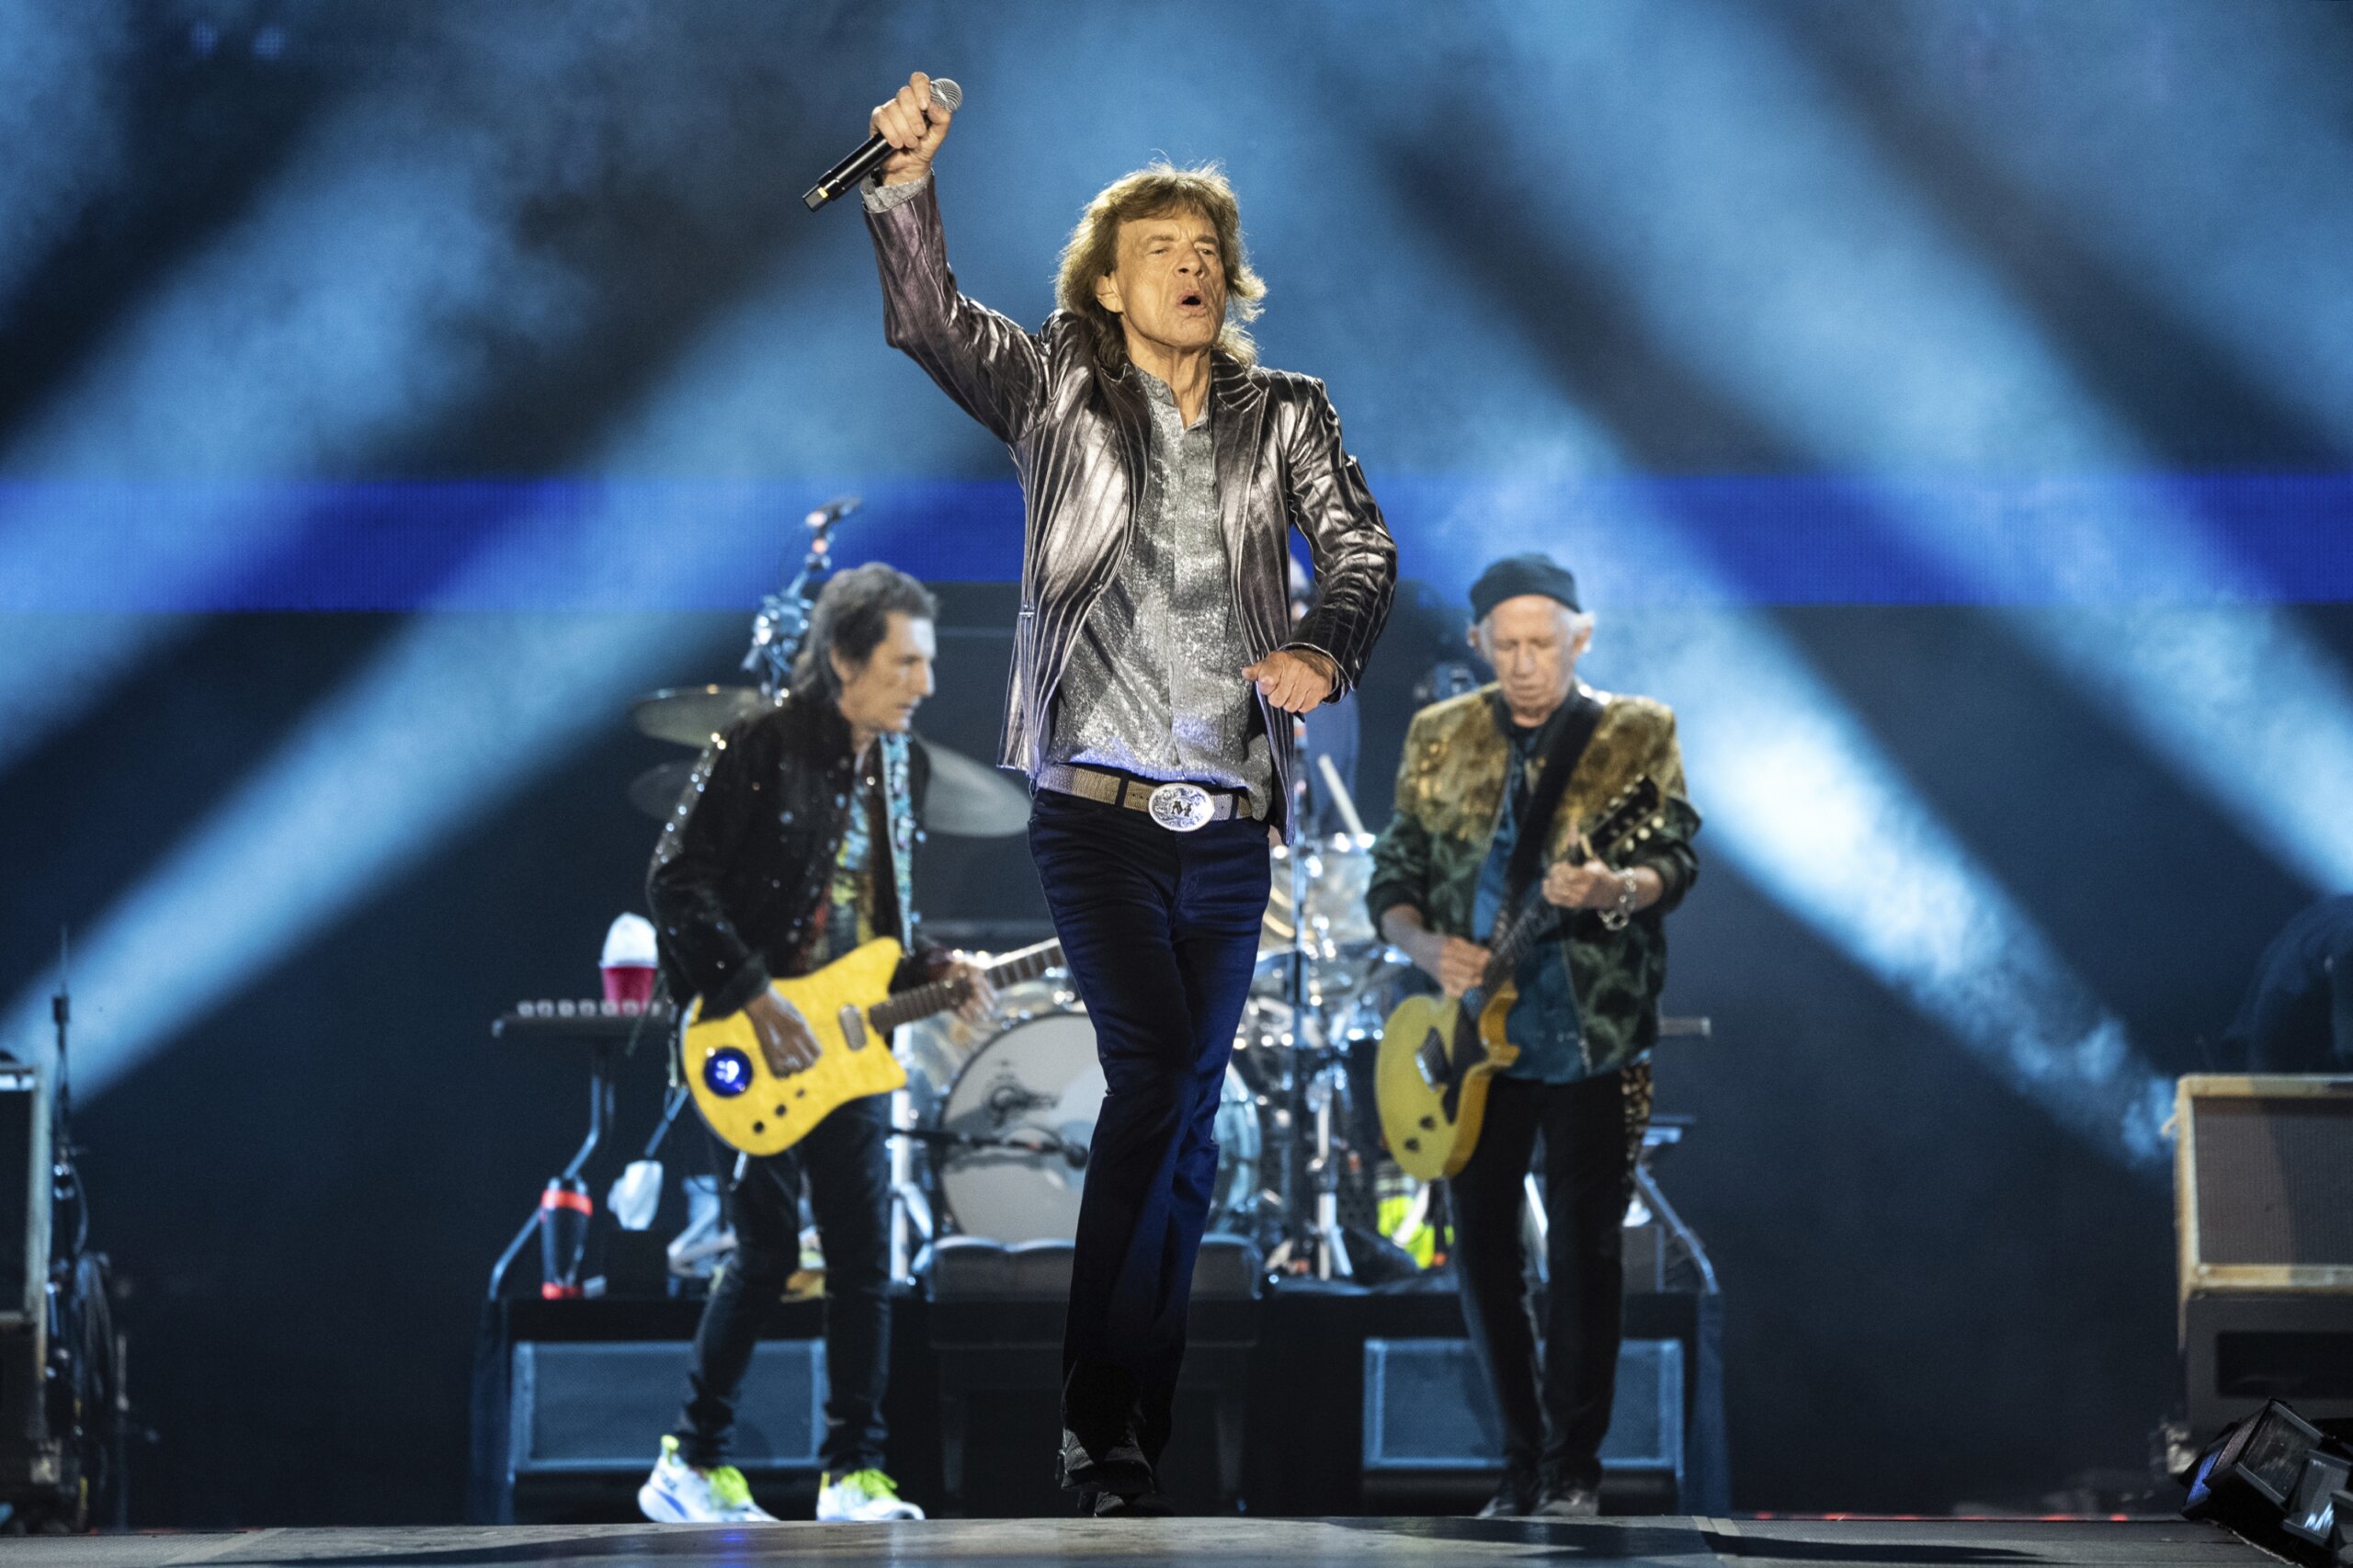 Time is on their side Rolling Stones to rock New Orleans Jazz Fest after 2 previous tries